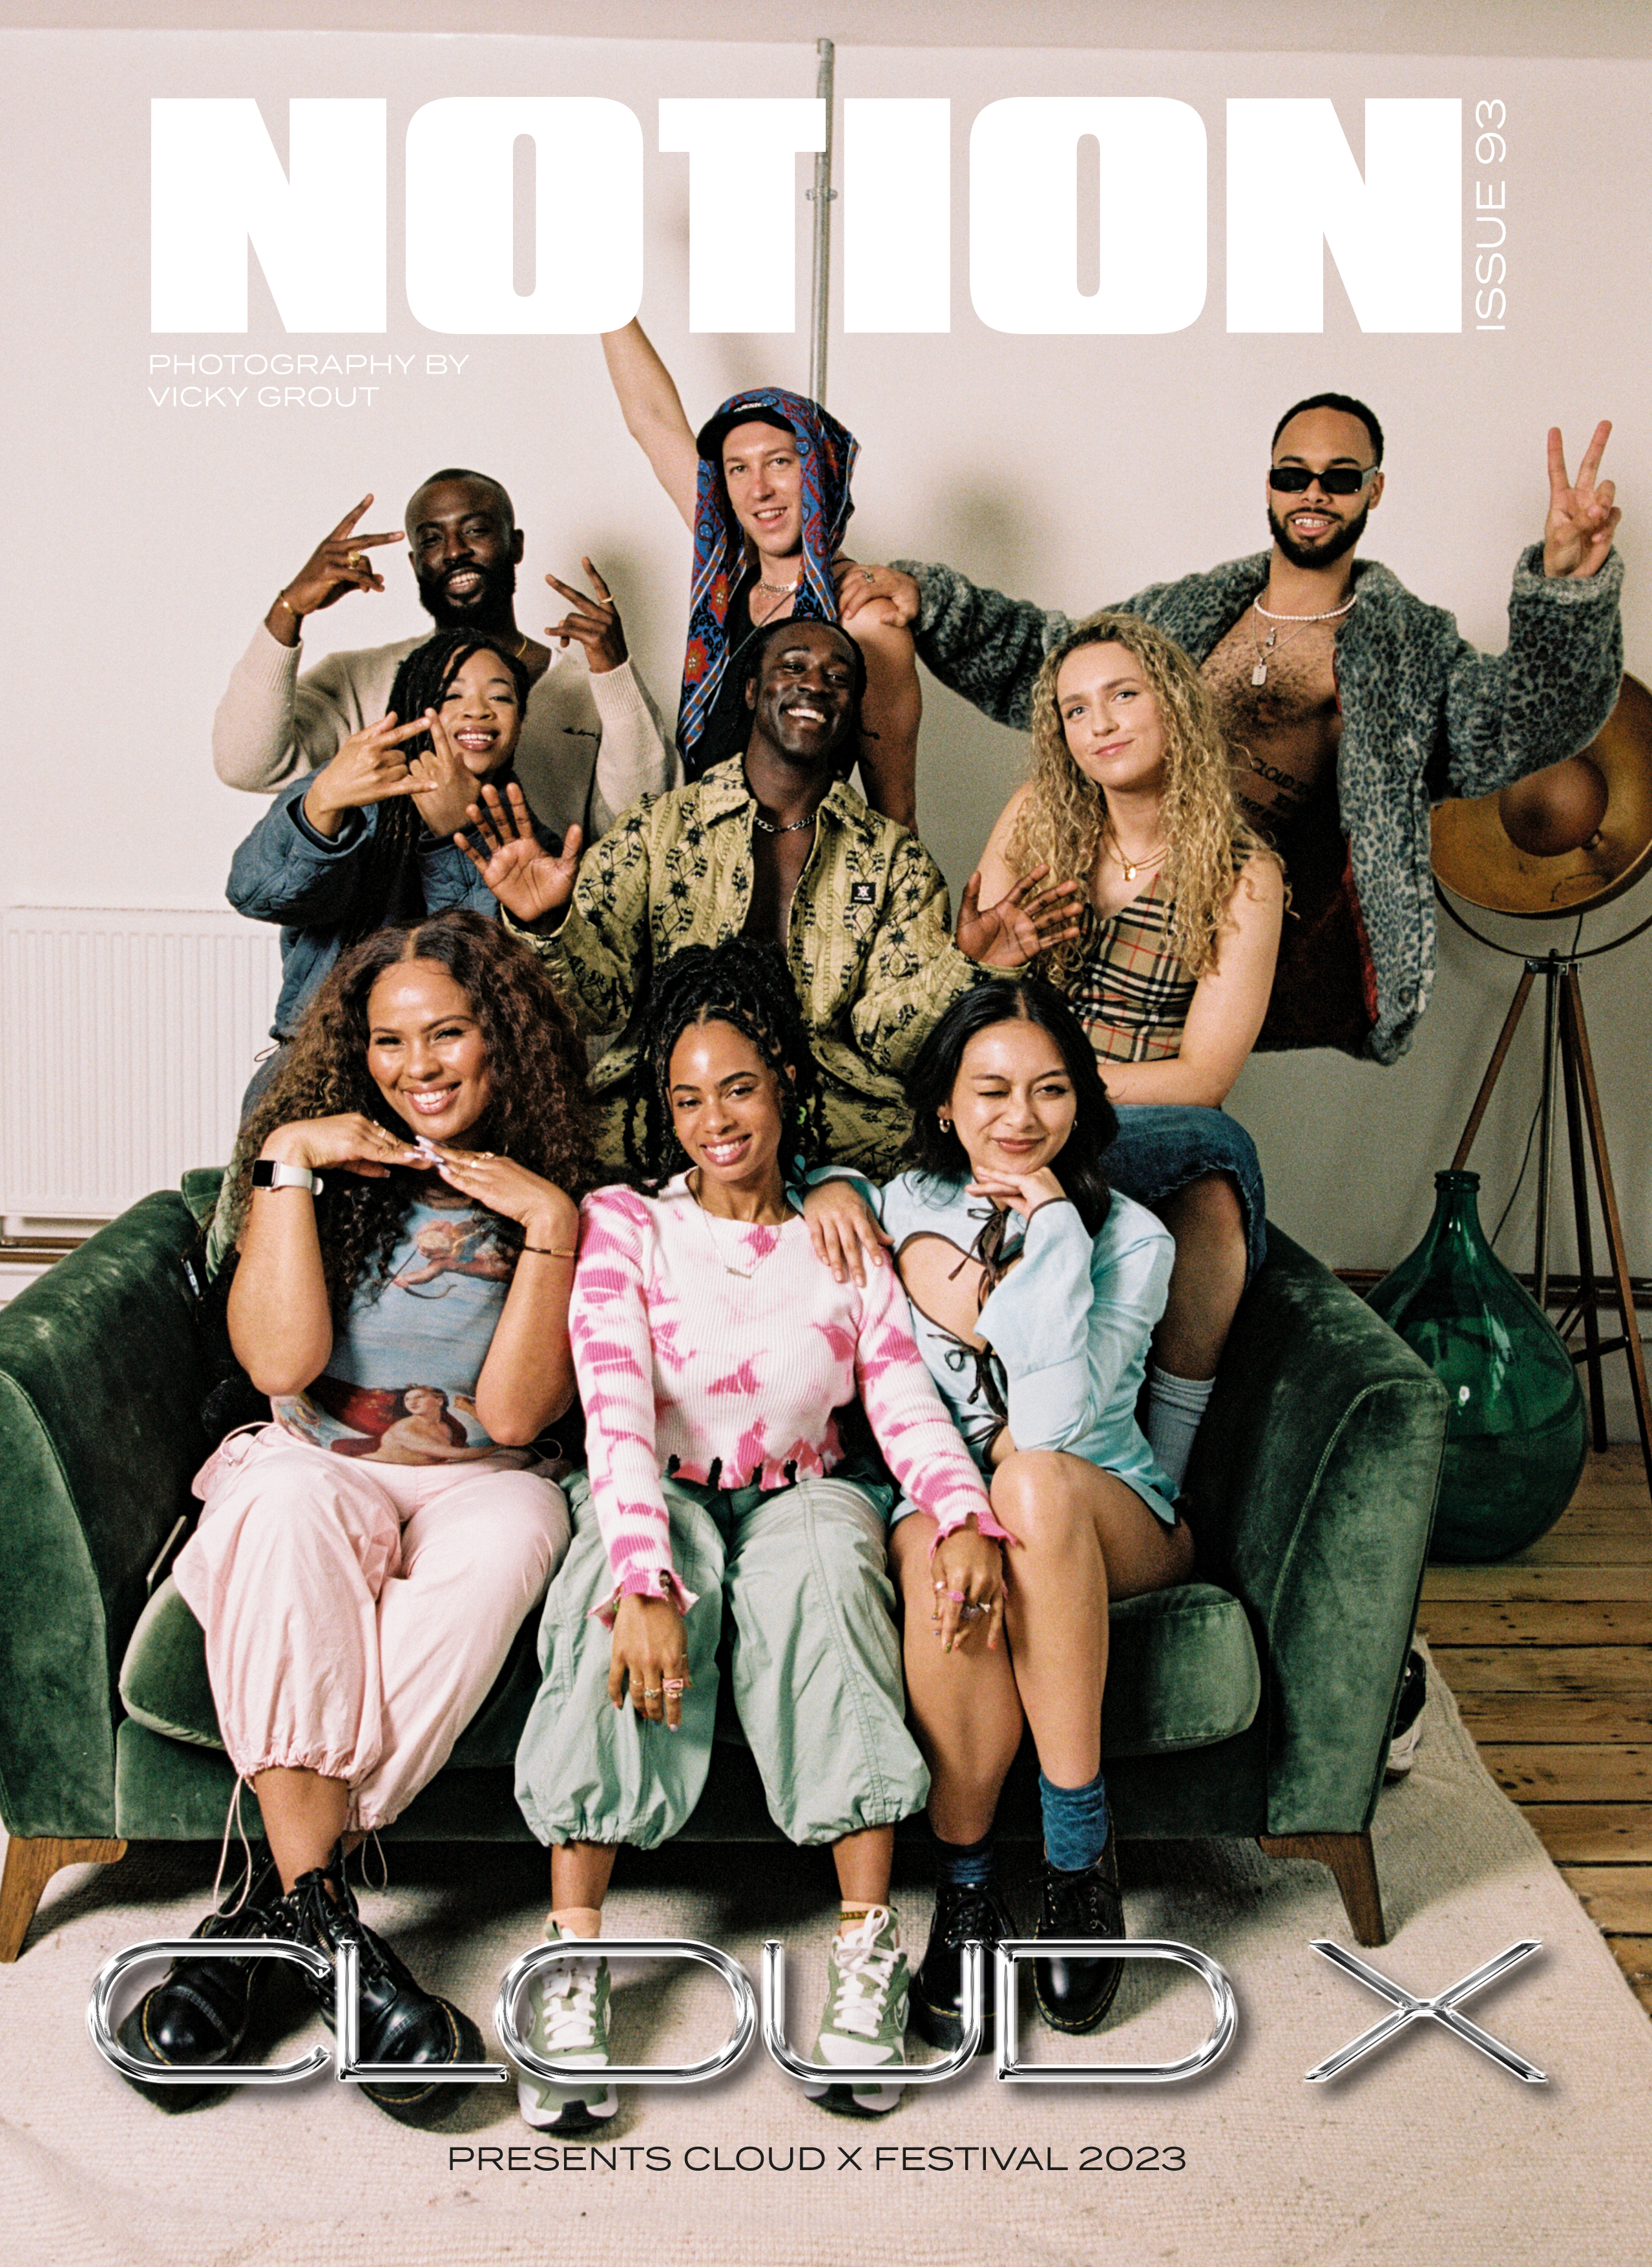 the cloud x team sit together. they are pictured on the cover of notion magazine